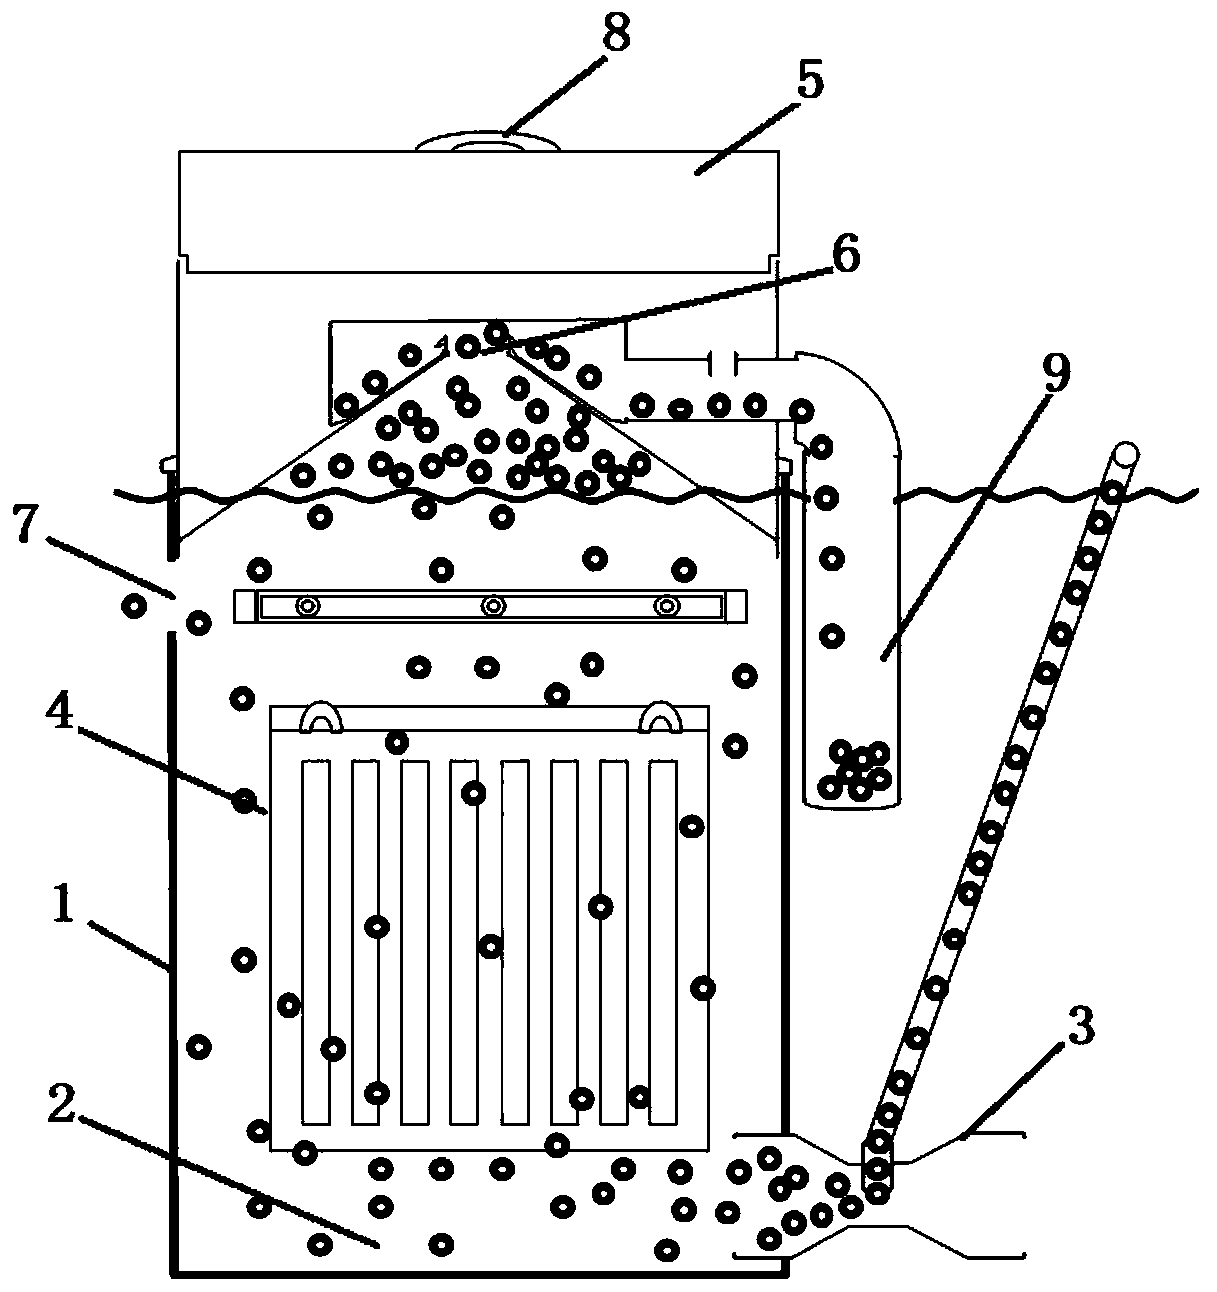 Super-bubble biochemical gas cap segregation apparatus and application thereof